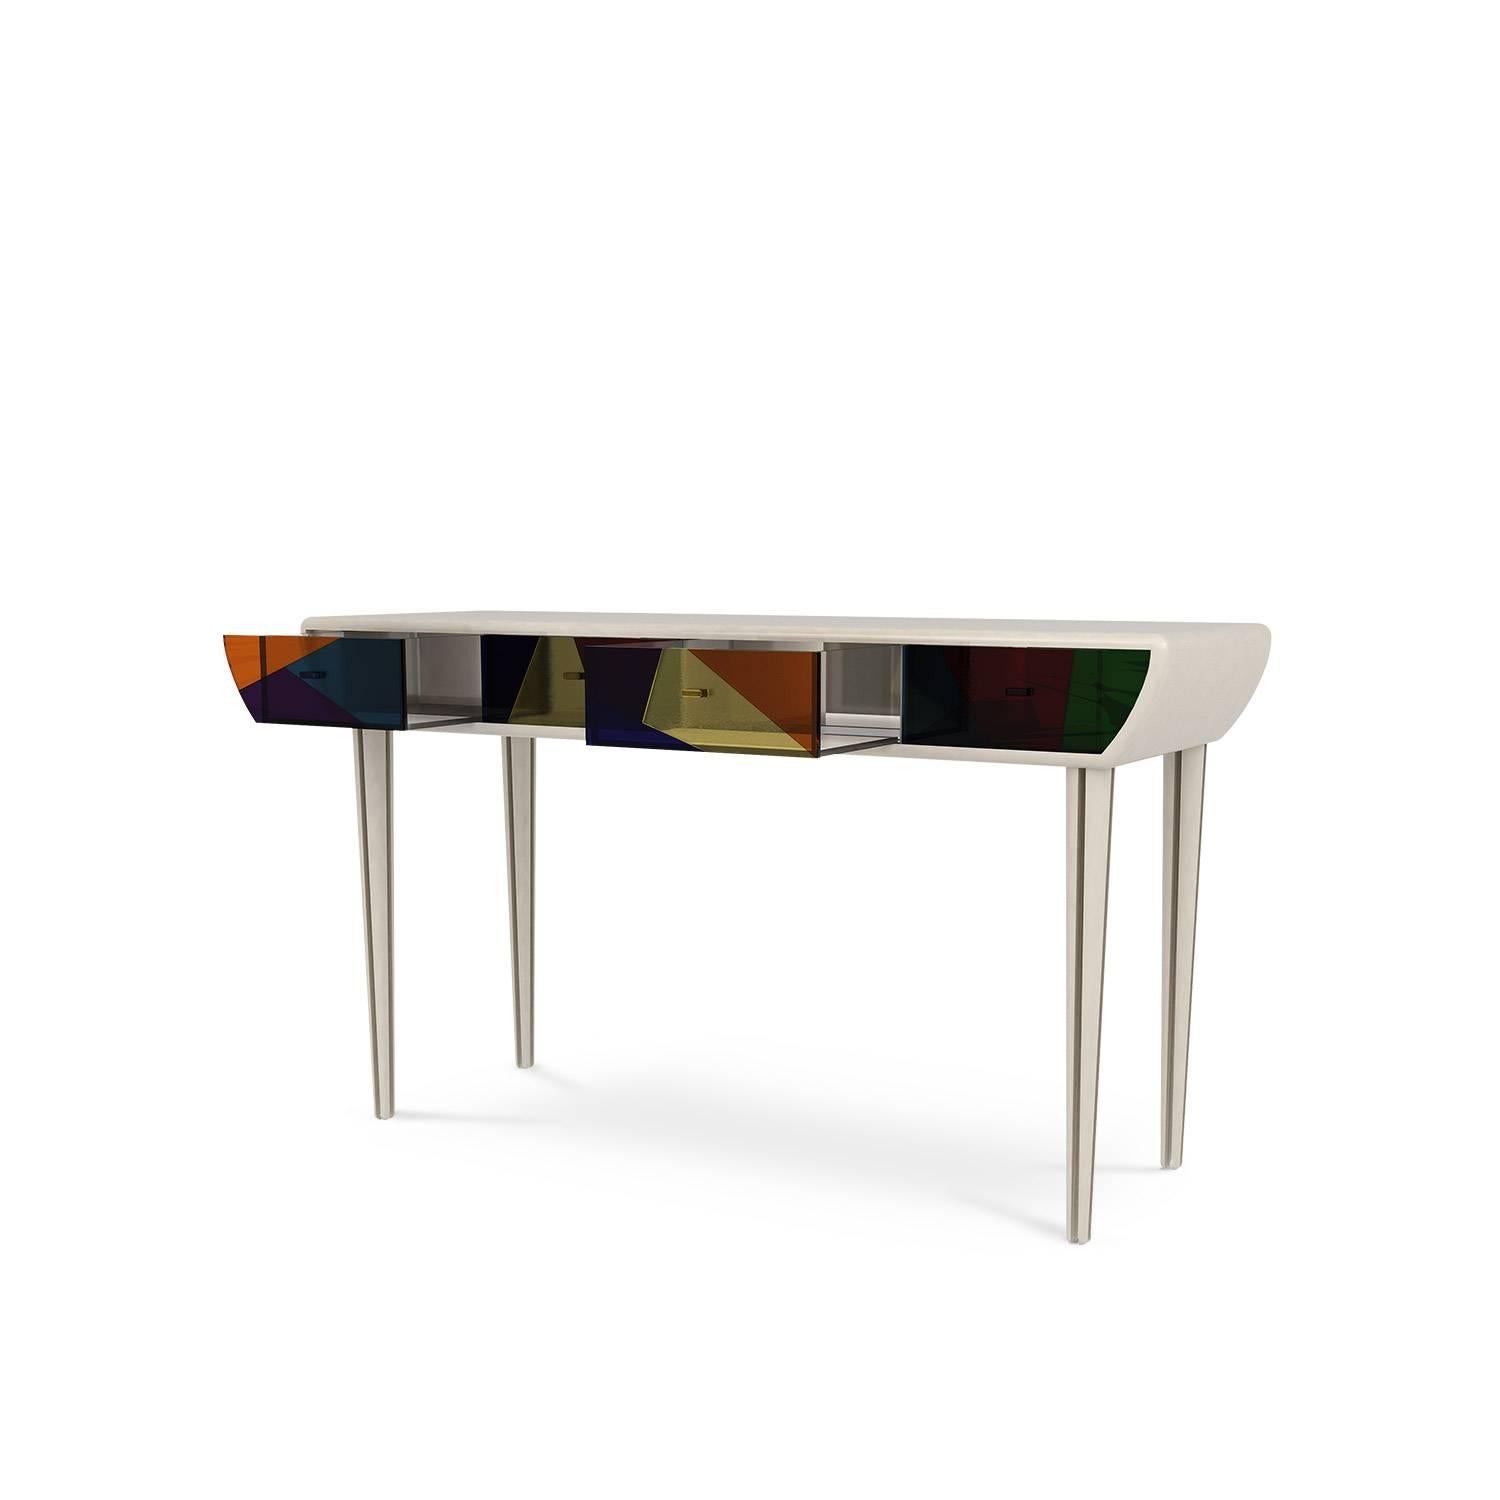 Vitral console is a tribute to the hand-painted glass tiles, keeping alive a traditional material, produced since ancient times. This contemporary console is an exclusive design piece that combines the dynamism of design with the power of narrative.